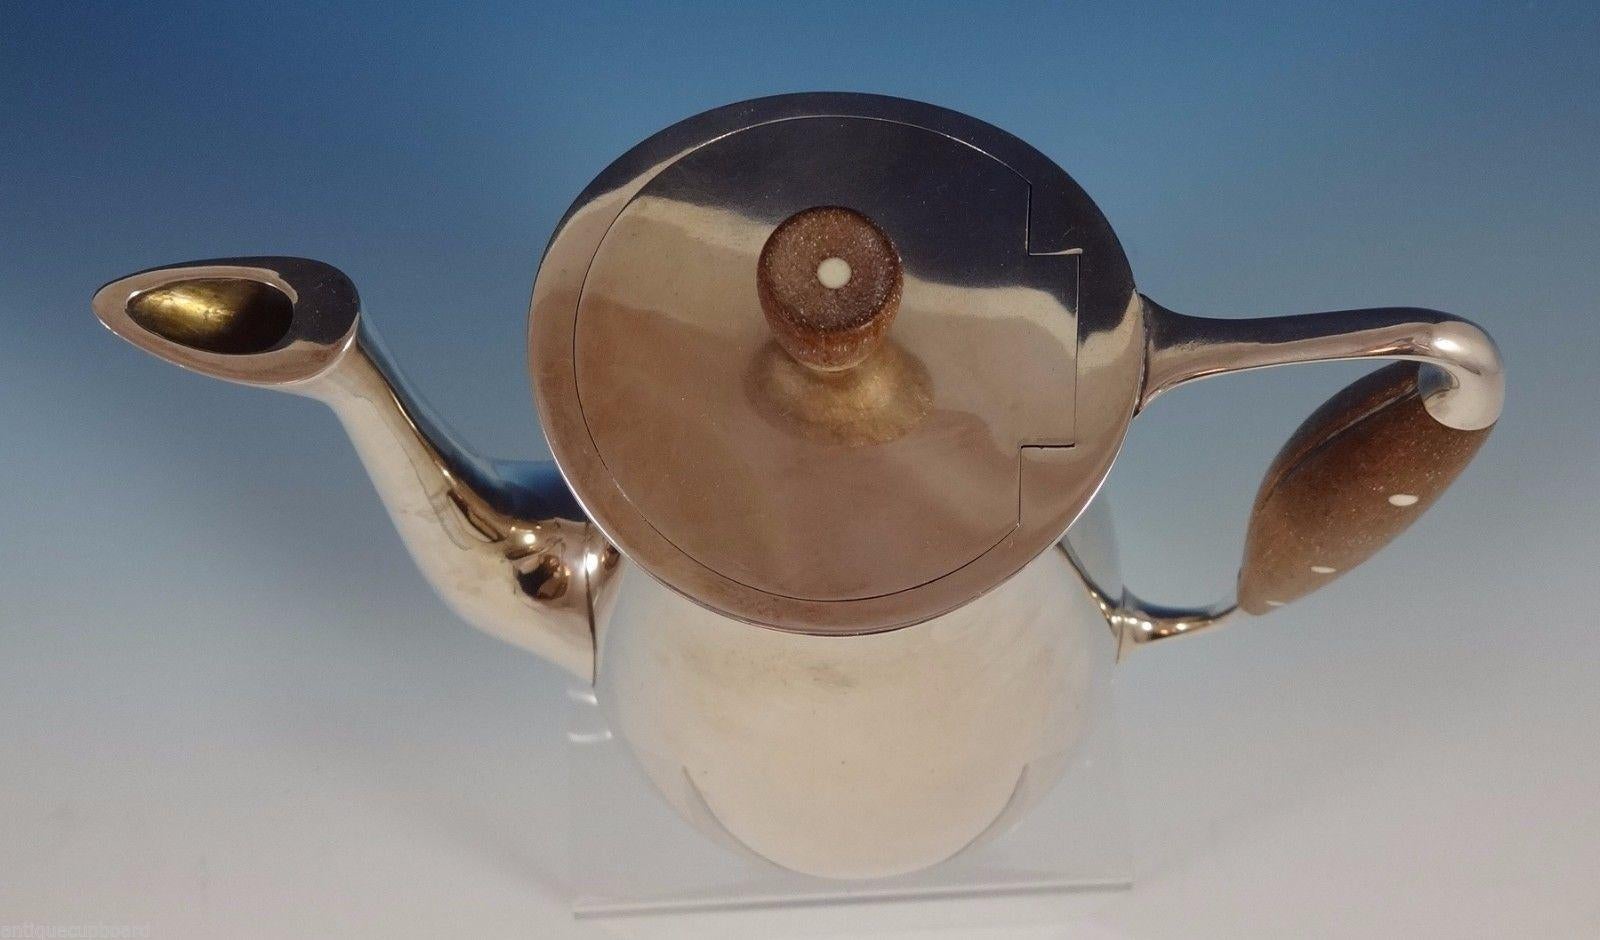 Michelsen

Modernist Danish sterling silver coffee pot made by Michelson. It has a wood handle and finial inlaid with dots. The piece dates from the 1940s-1950s. It measures 8 1/4 tall and weighs 23.57 ozt. It is not monogrammed and is in excellent